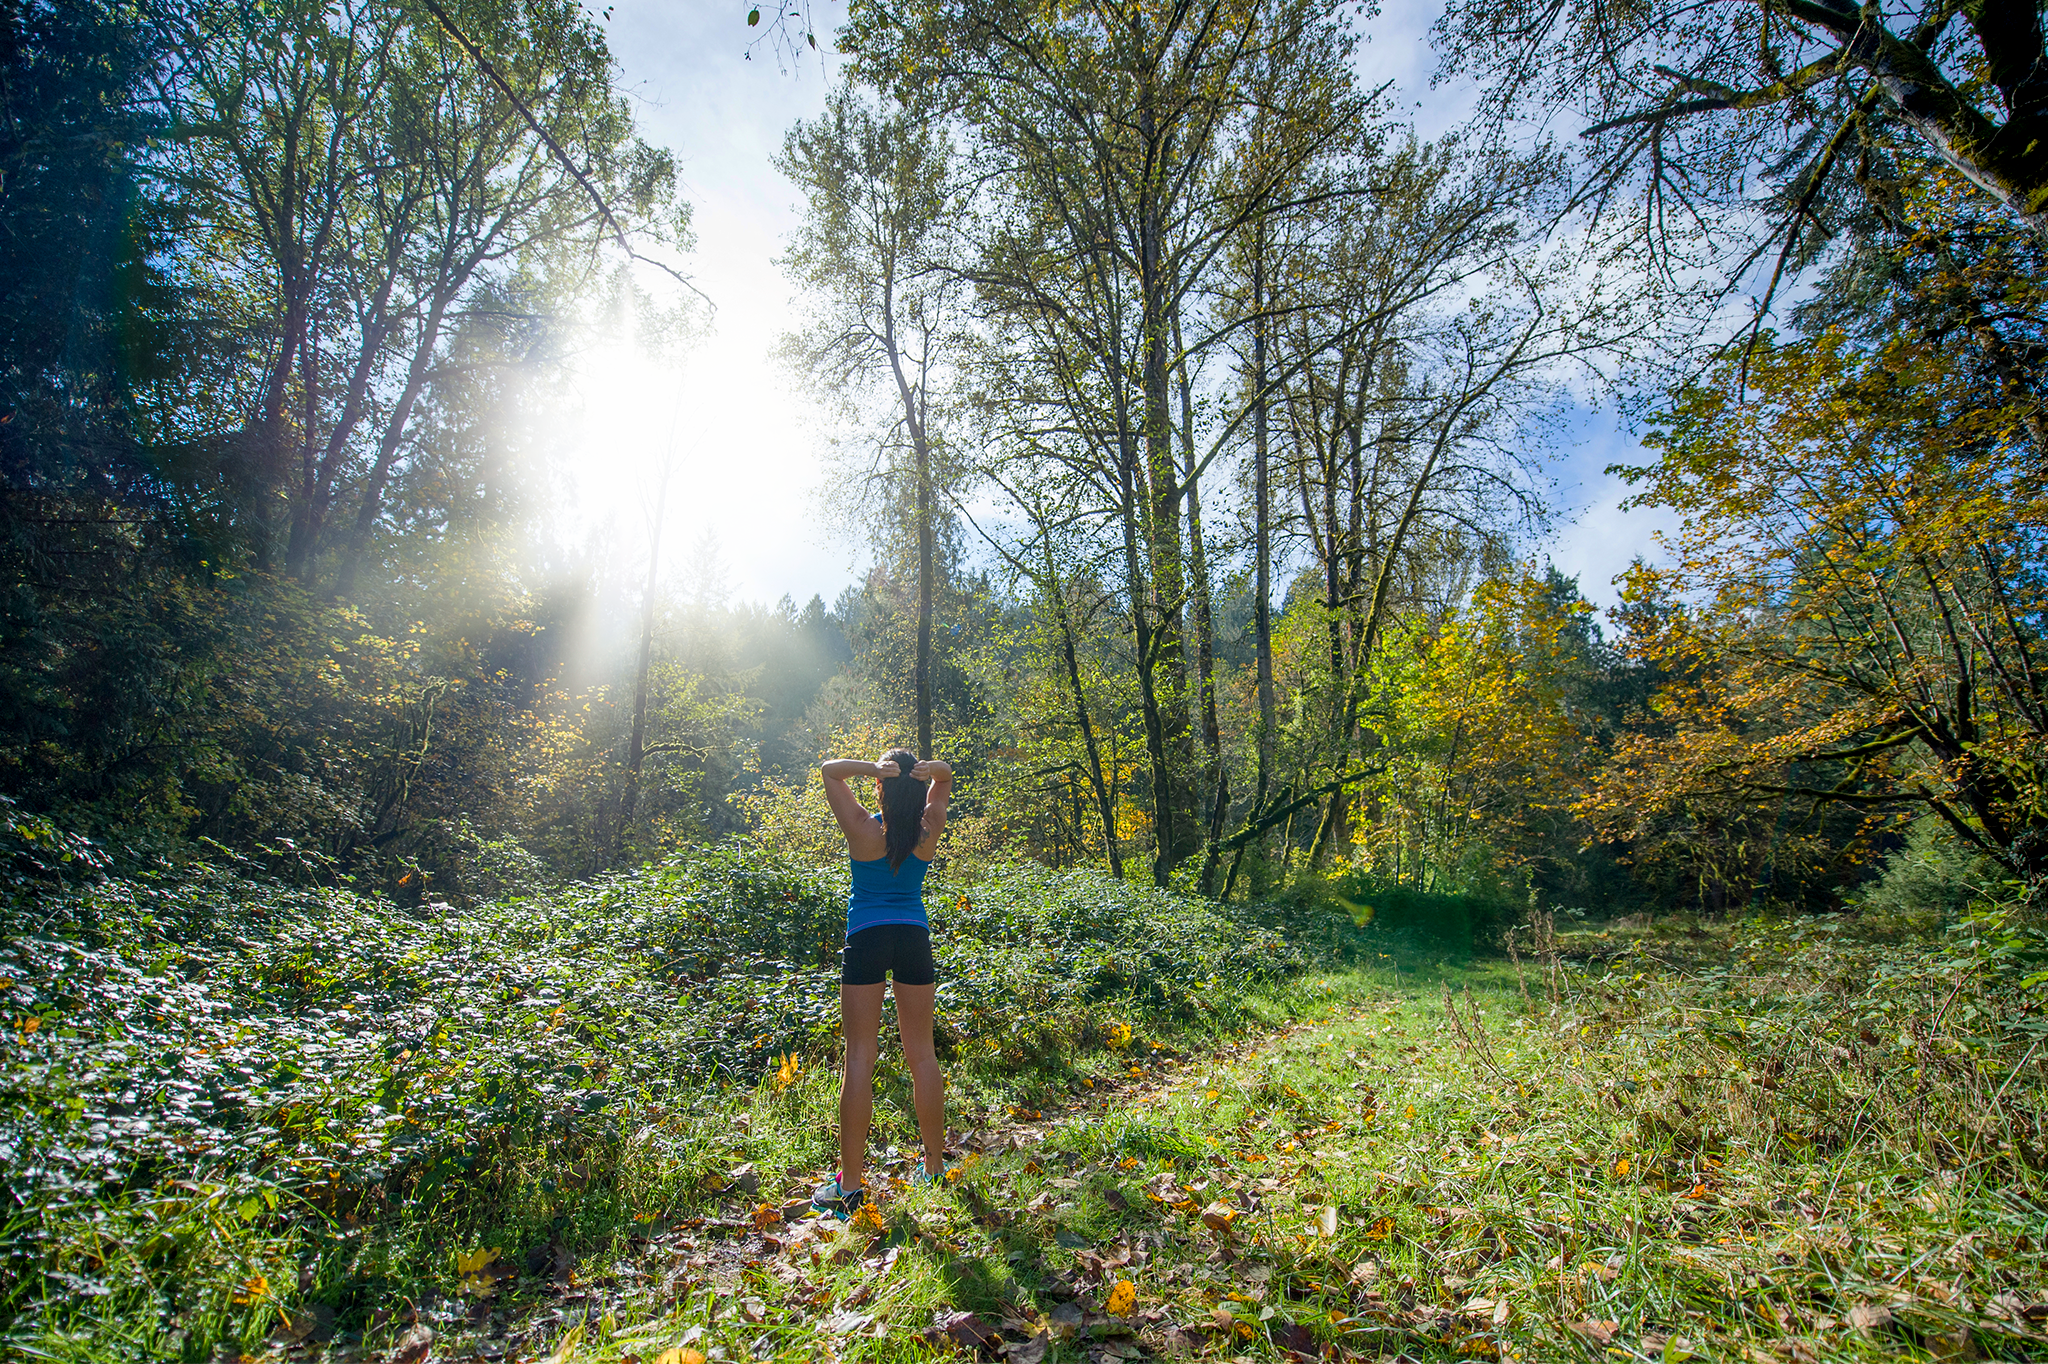 A woman hiking in the forest with sunlight beaming through the trees, but blurry.